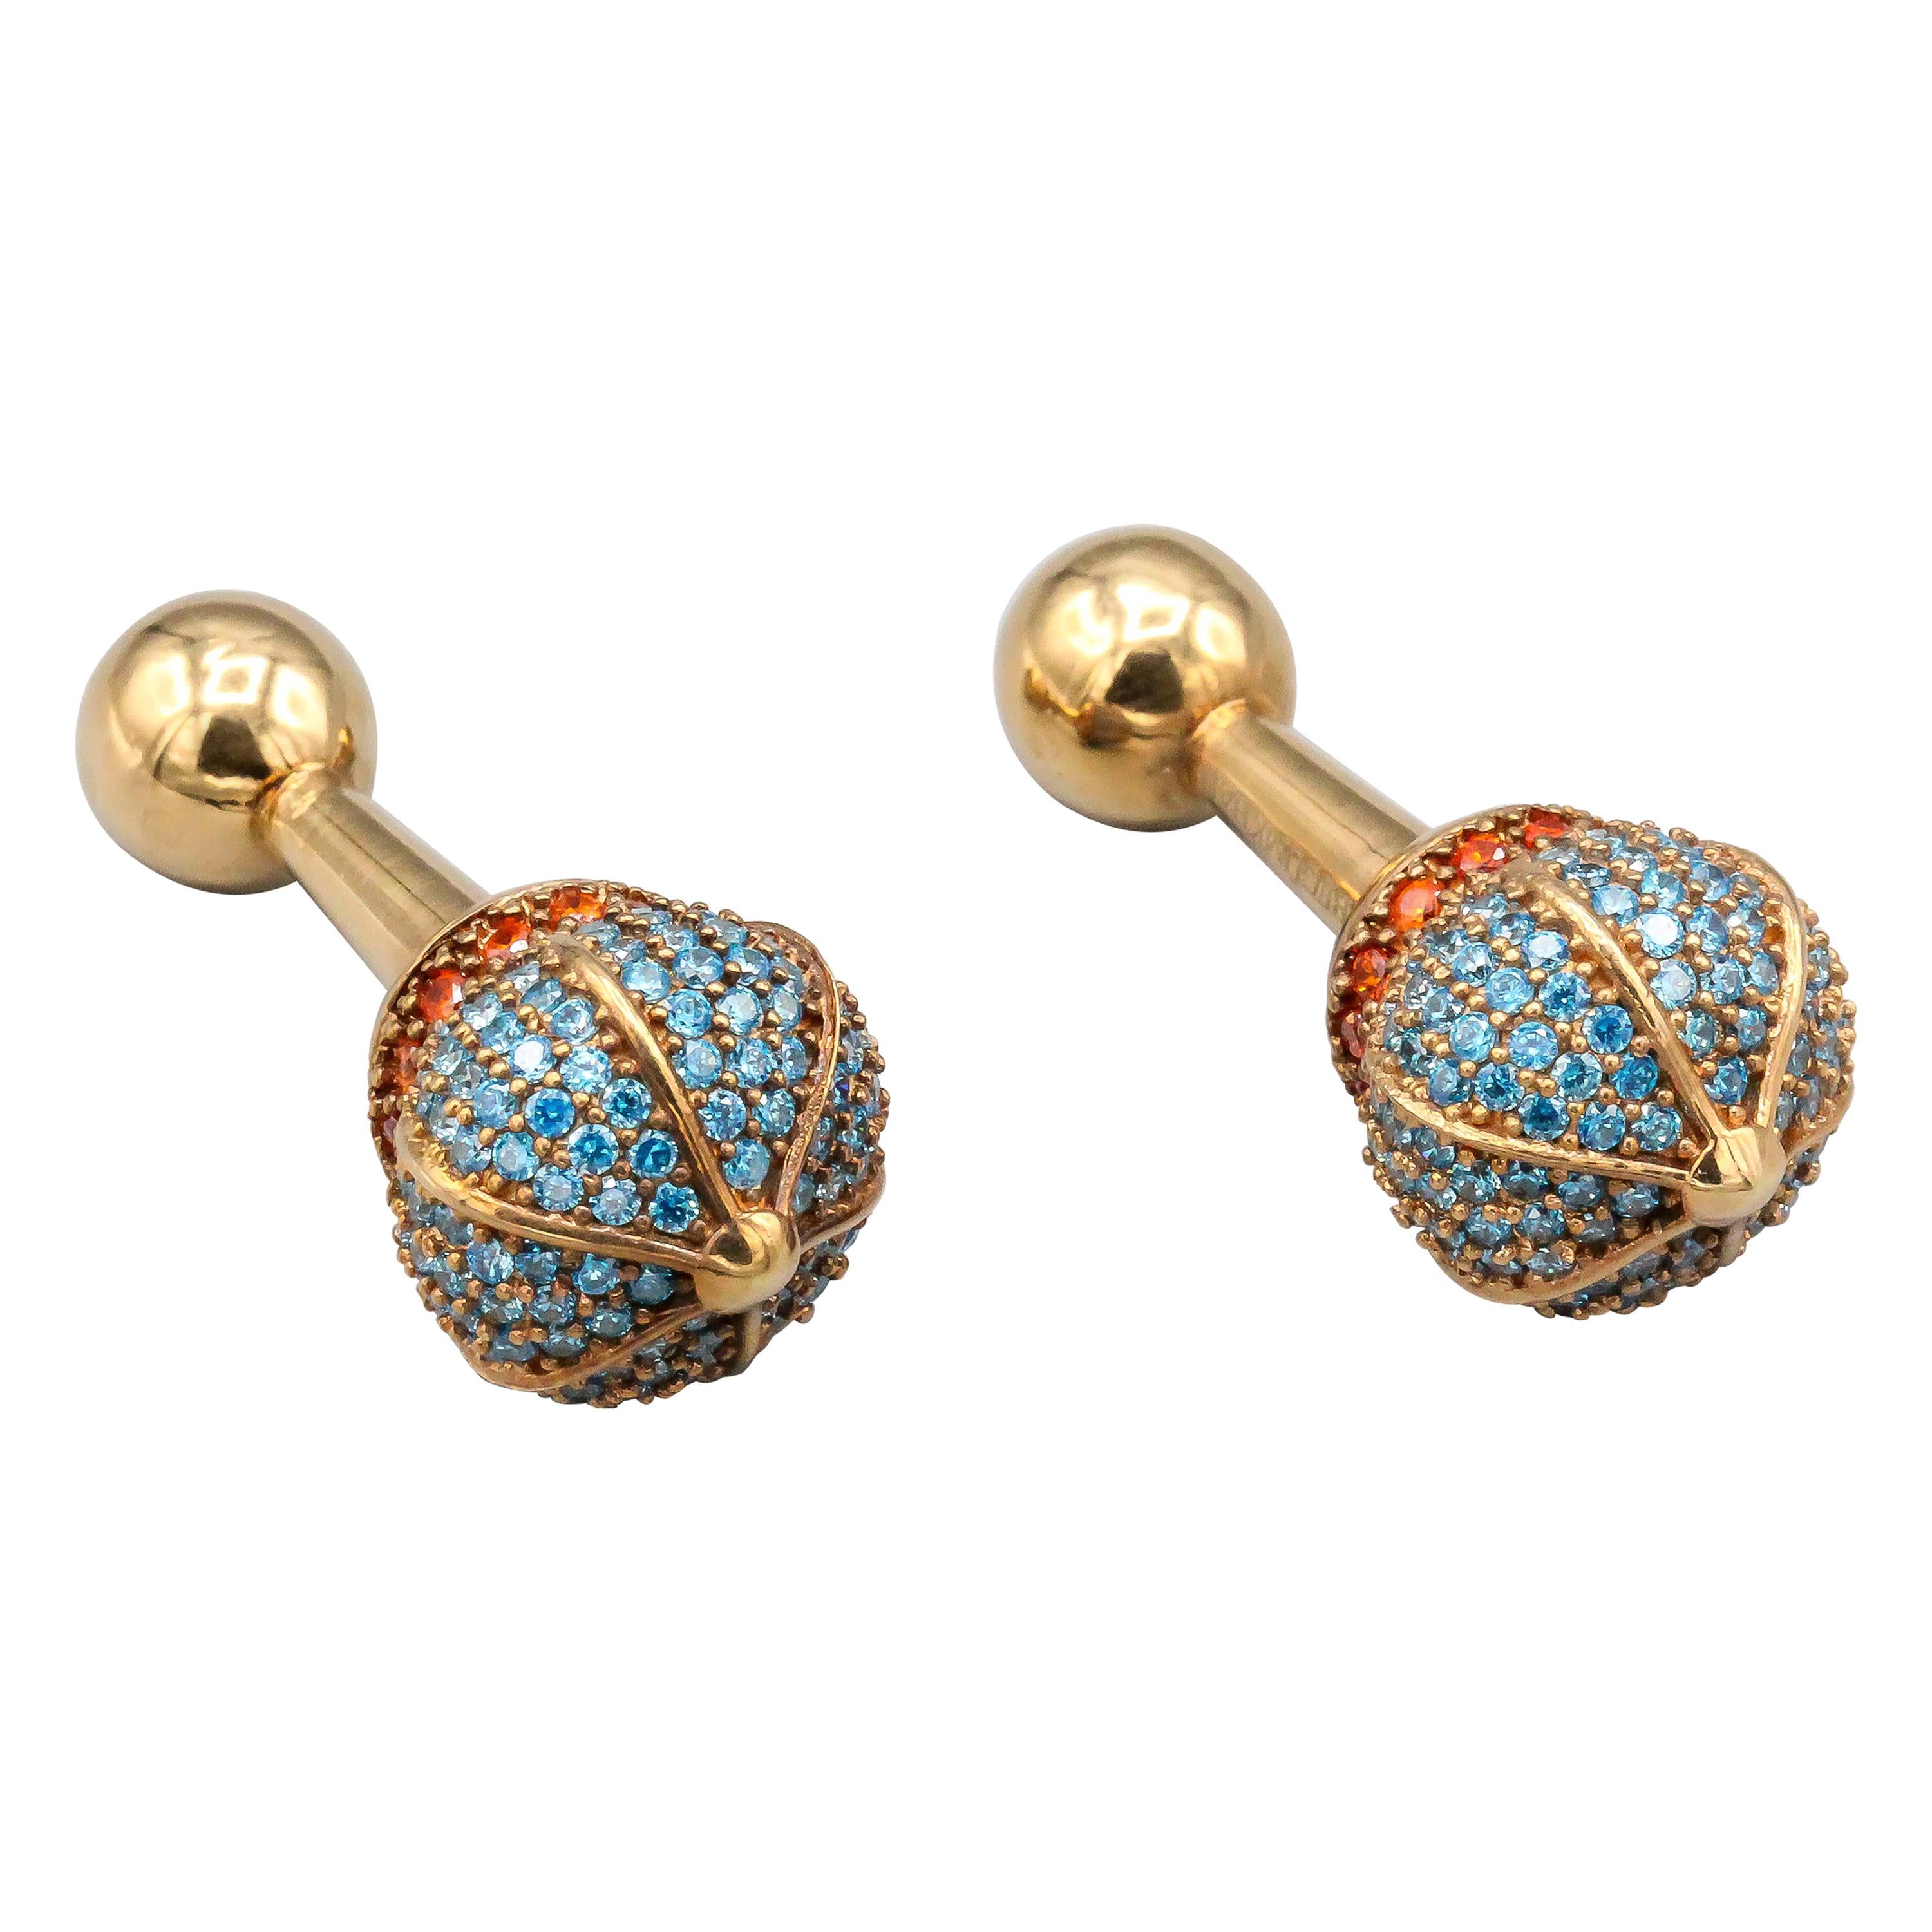 Begum Khan Colored Stone and Sapphire 18 Karat Gold Cufflinks For Sale